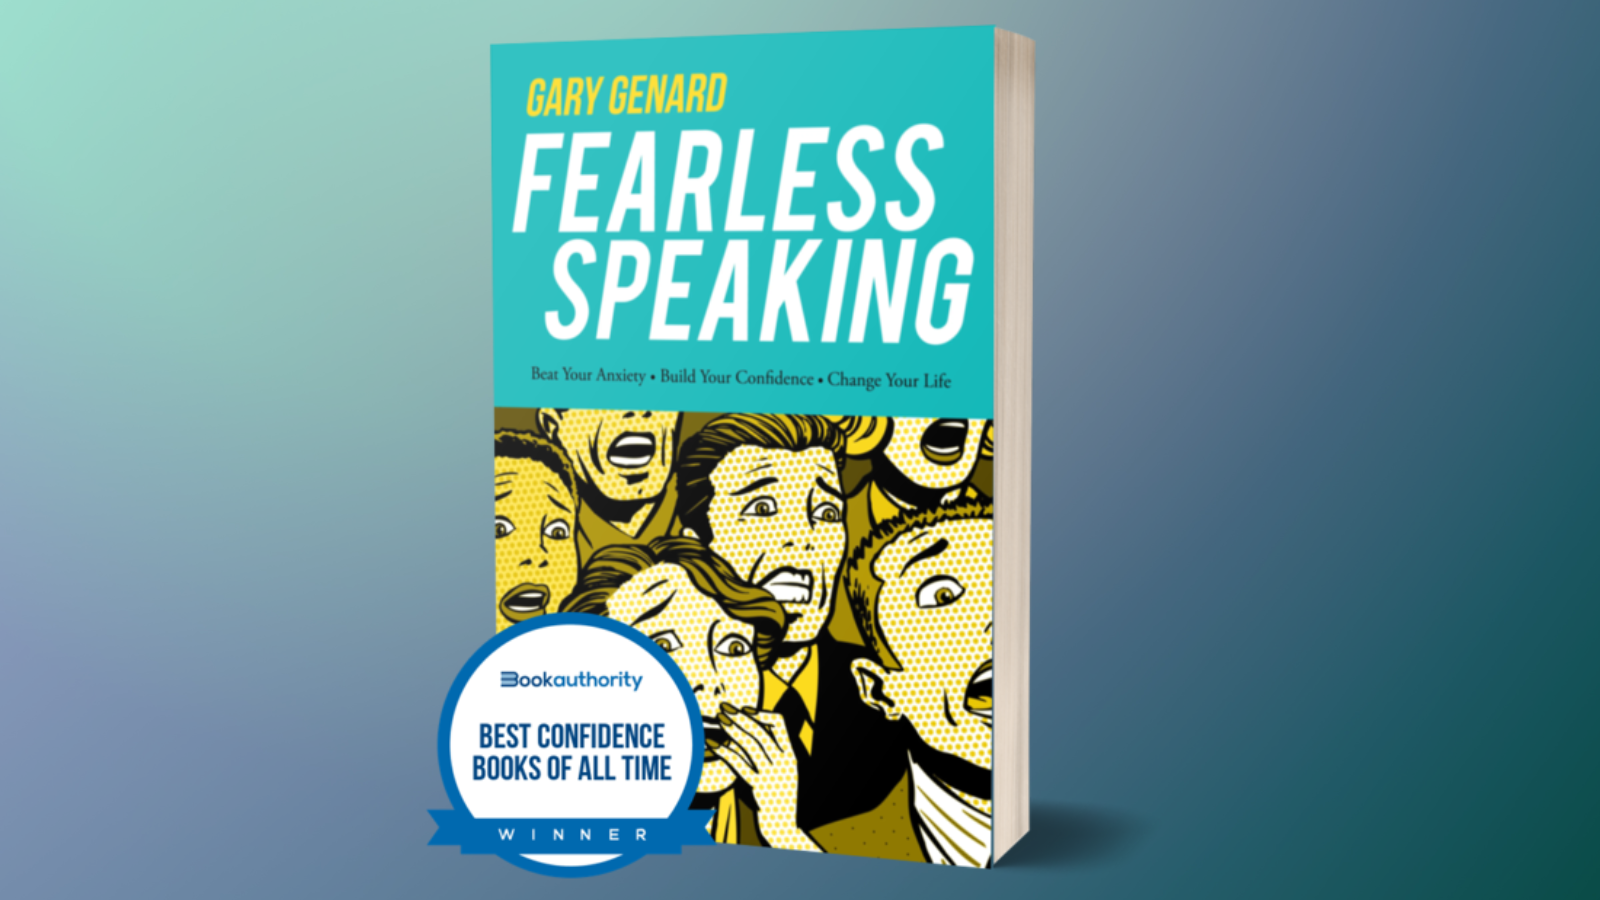 Dr. Gary Genard's book on how to overcome fear of public speaking, Fearless Speaking.